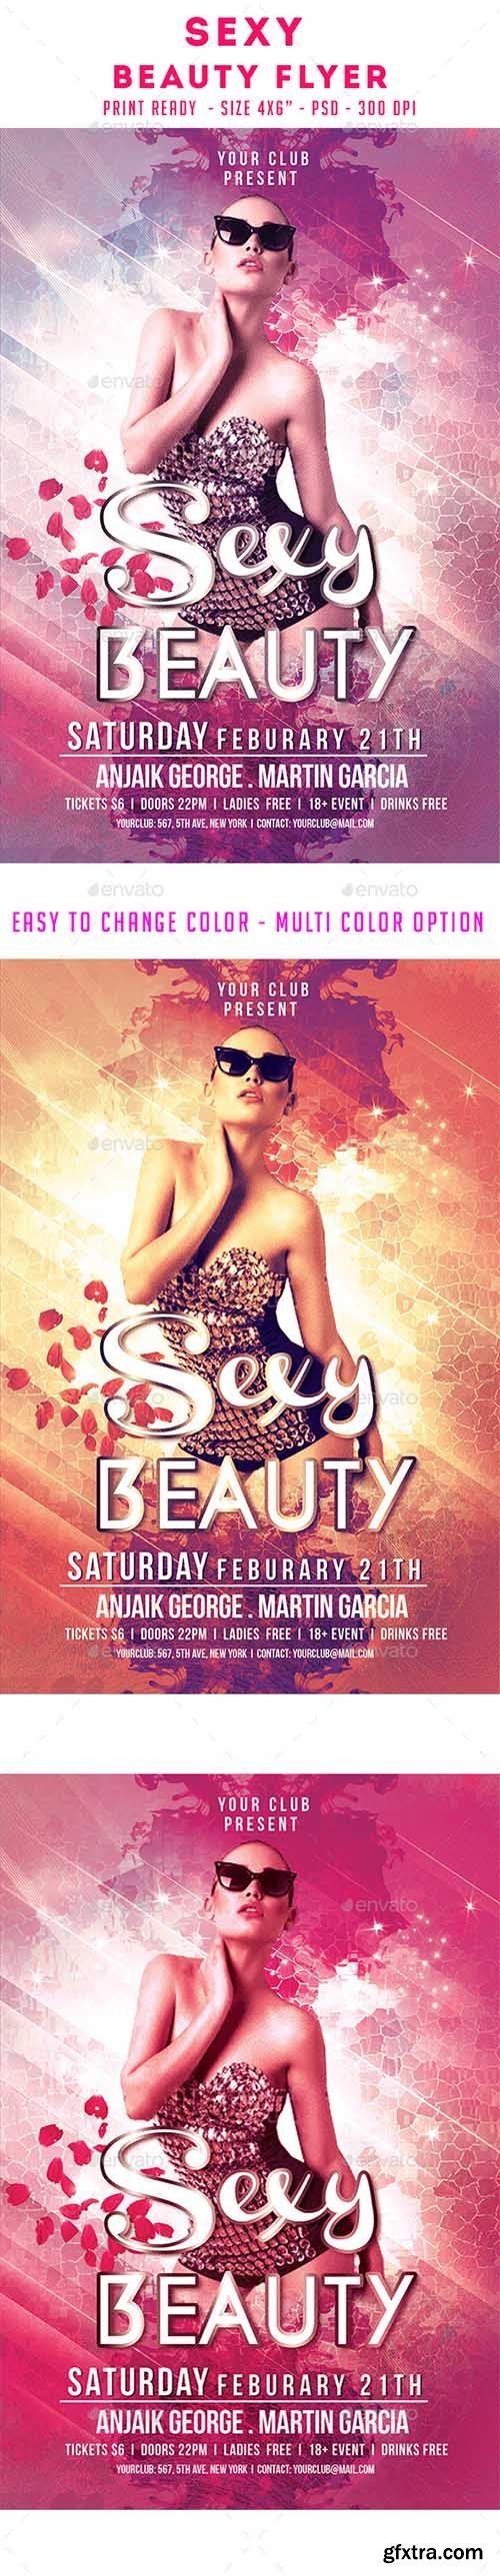 GraphicRiver Sexy Beauty Flyer 10376608